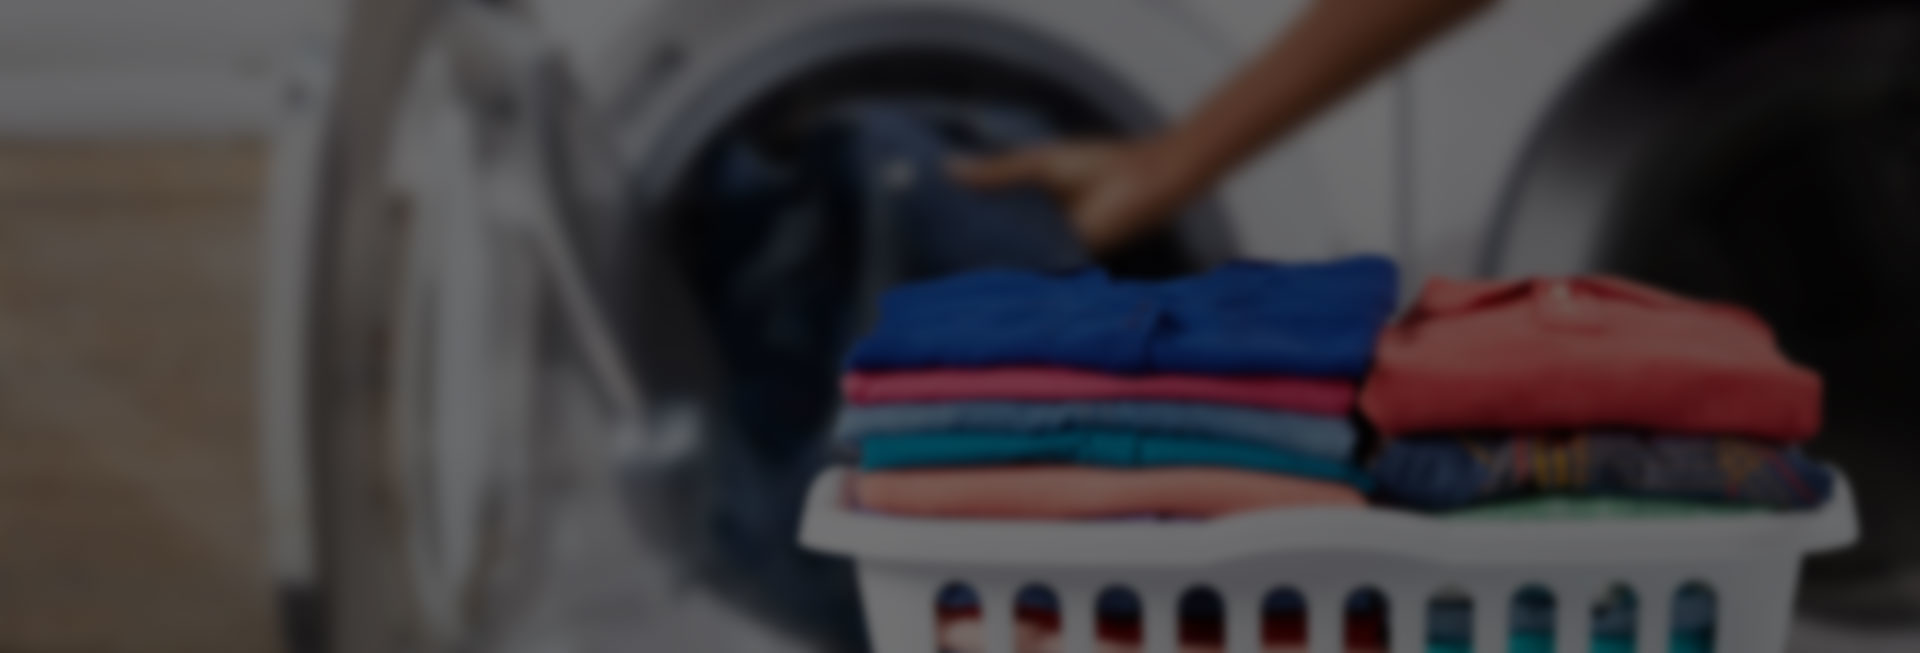 A person loading clothes into a washing machine